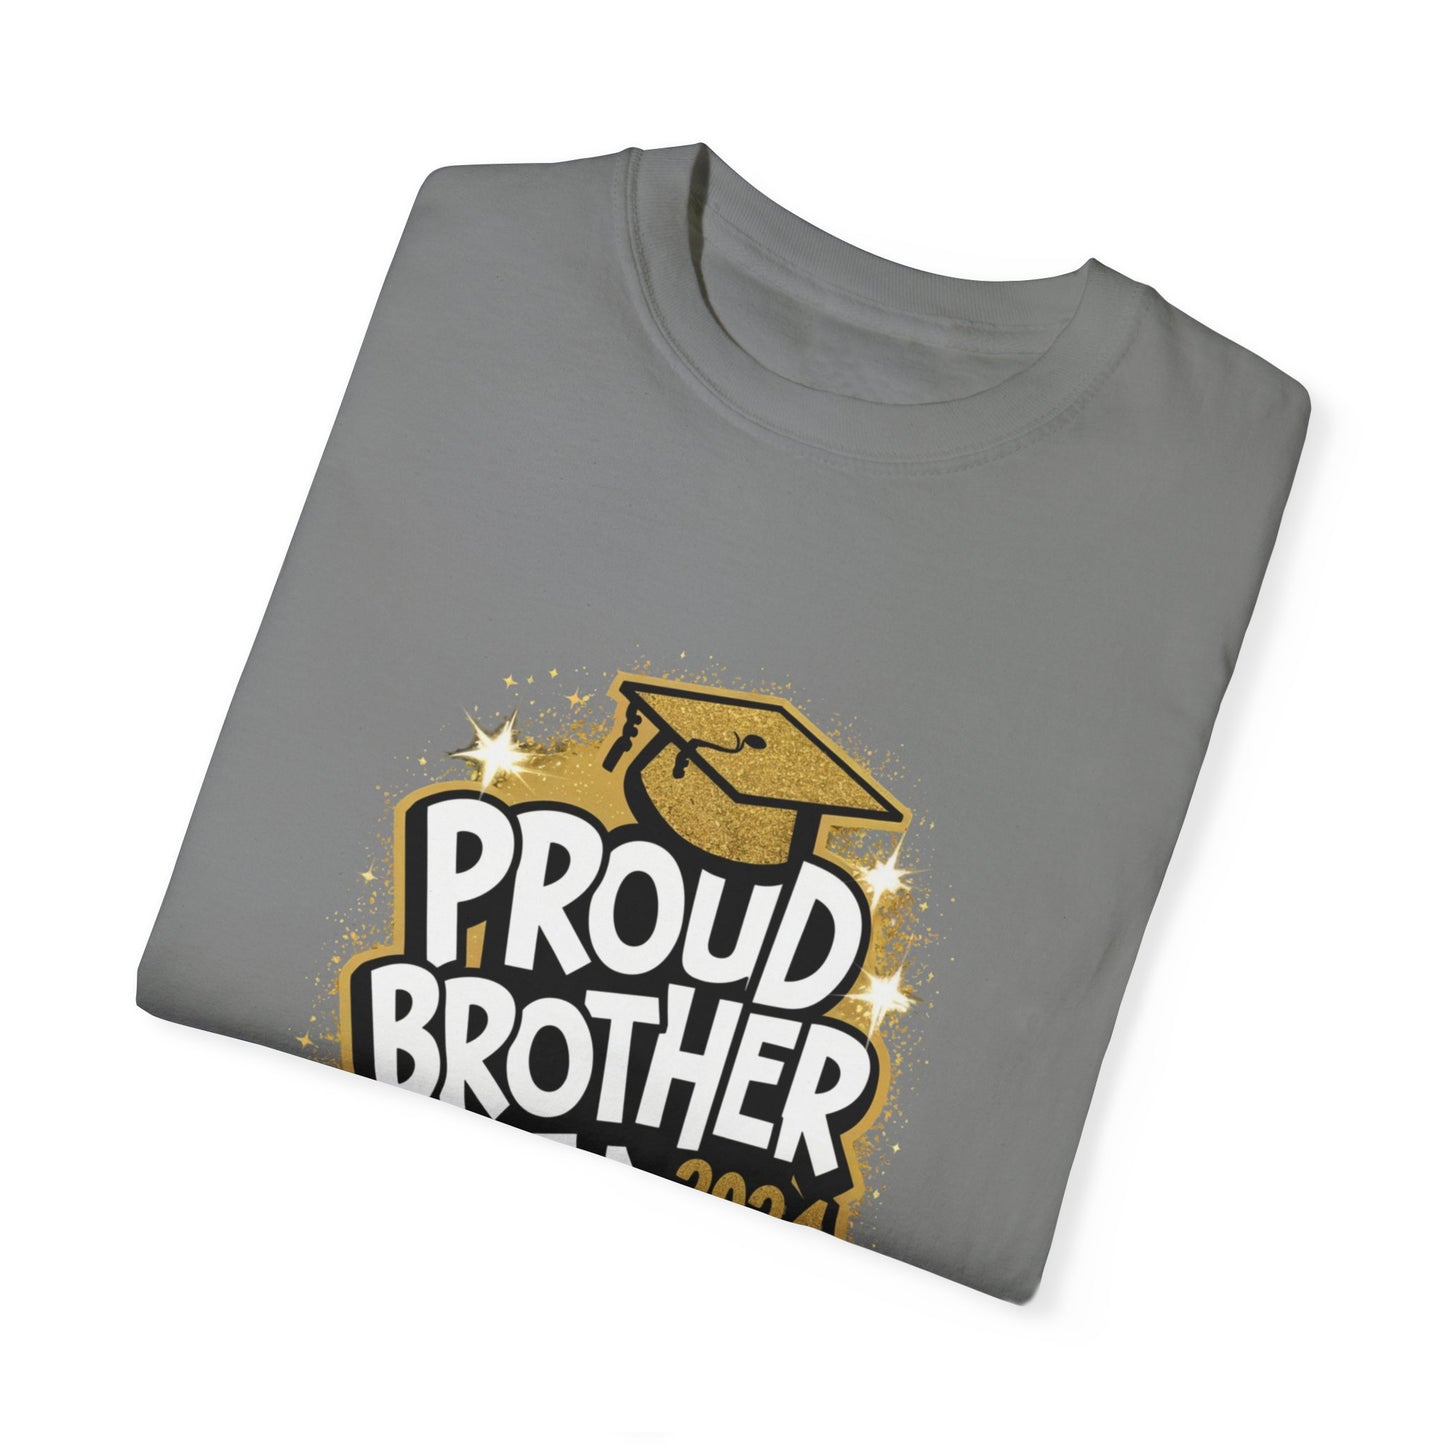 Proud Brother of a 2024 Graduate Unisex Garment-dyed T-shirt Cotton Funny Humorous Graphic Soft Premium Unisex Men Women Grey T-shirt Birthday Gift-41